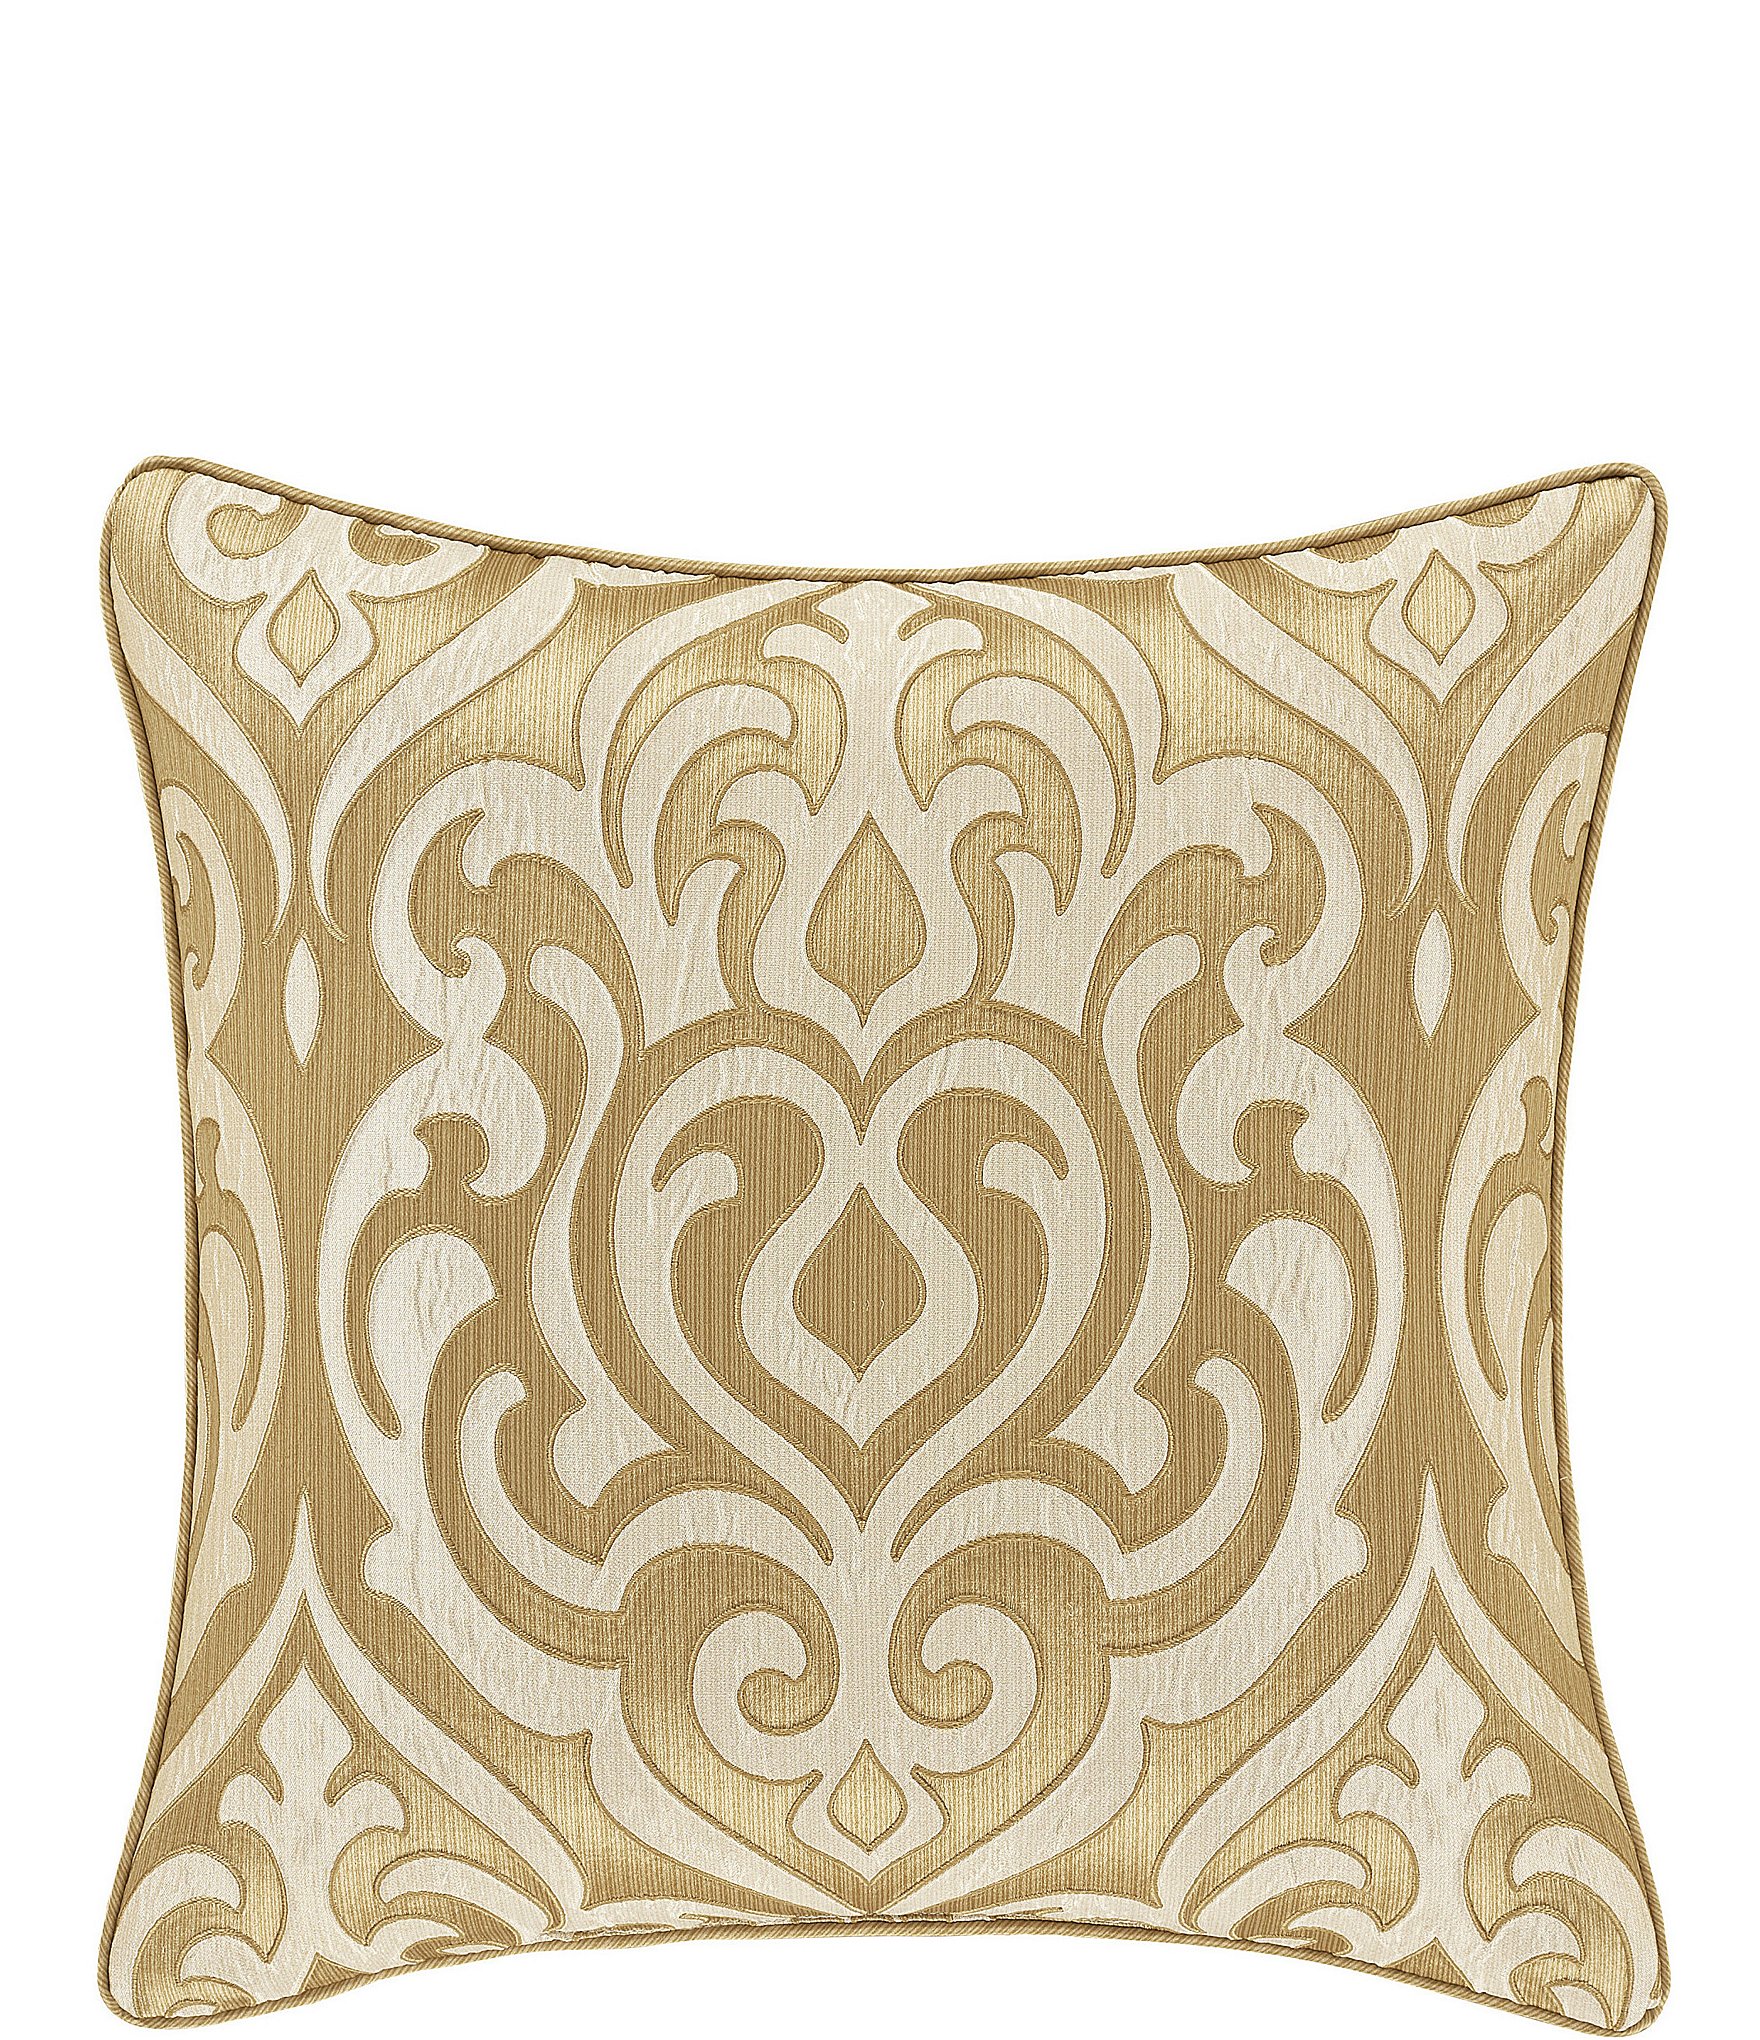 Waterford Ansonia Decorative Pillows Set of 3 - Ivory, Gold